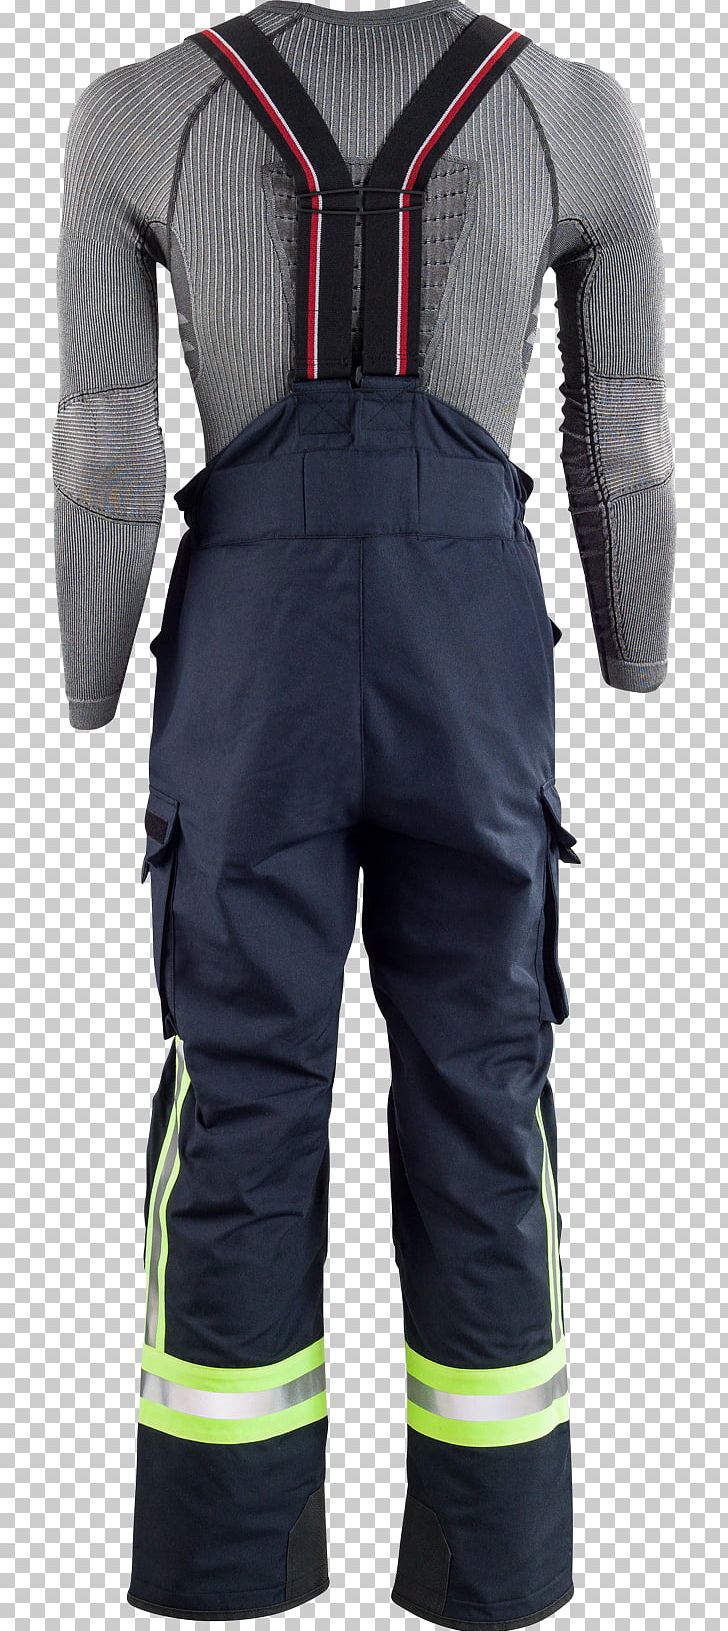 Pants Clothing Fire Department Überhose Schutzkleidung PNG, Clipart, Boilersuit, Clothing, En 469, Fire, Fire Department Free PNG Download